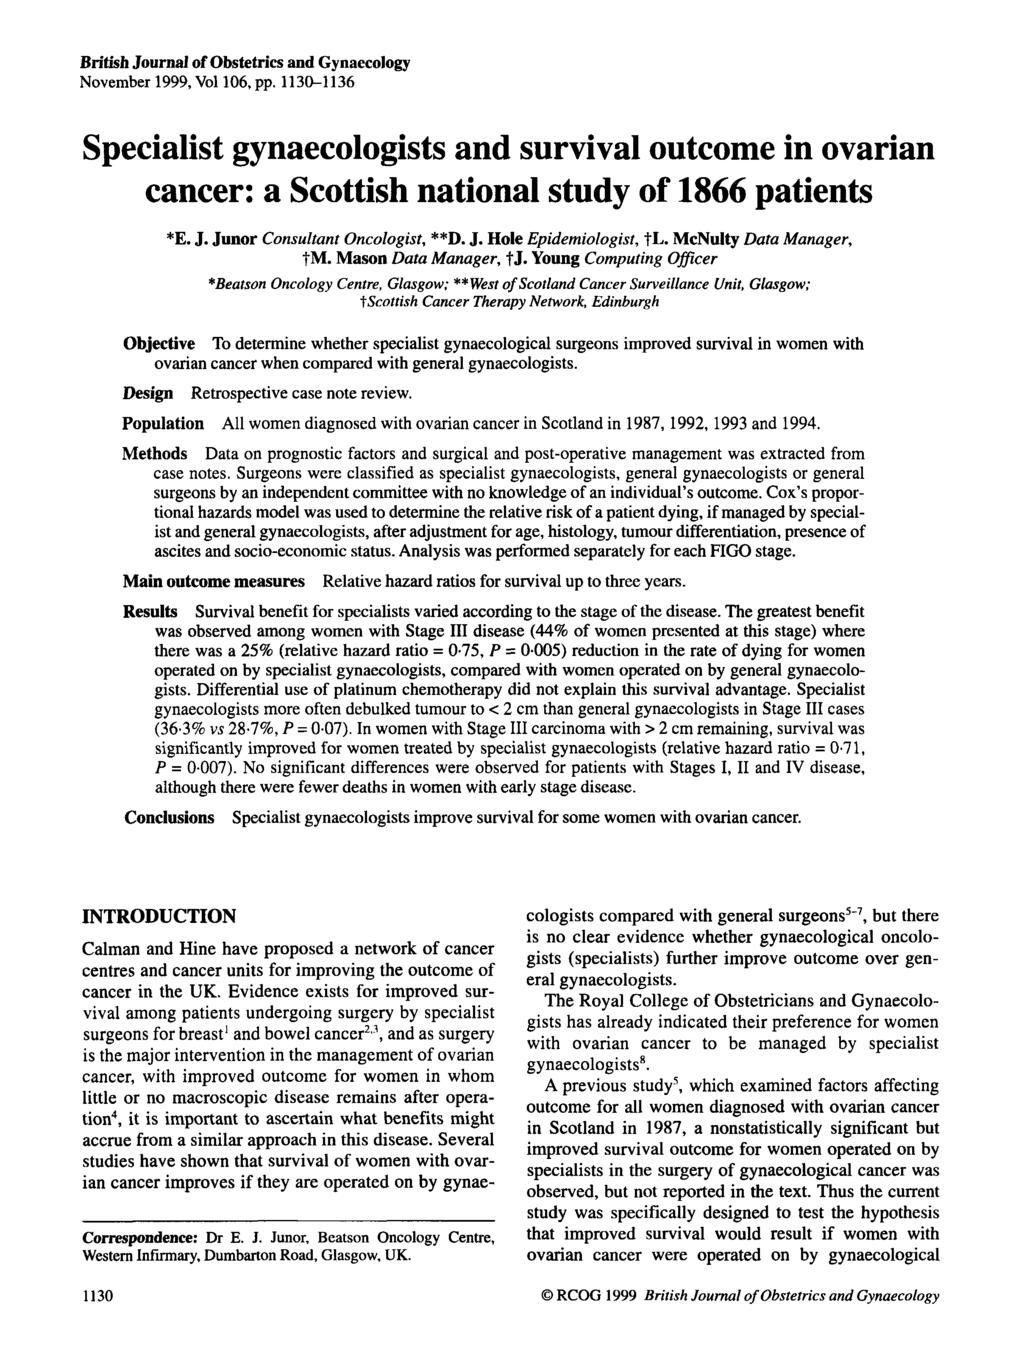 British Journal of Obstetrics and Gynaecology November 1999, Vol106, pp. 1130-1136 Specialist gynaecologists and survival outcome in ovarian cancer: a Scottish national study of 1866 patients *E. J. Junor Consultant Oncologist, **D.